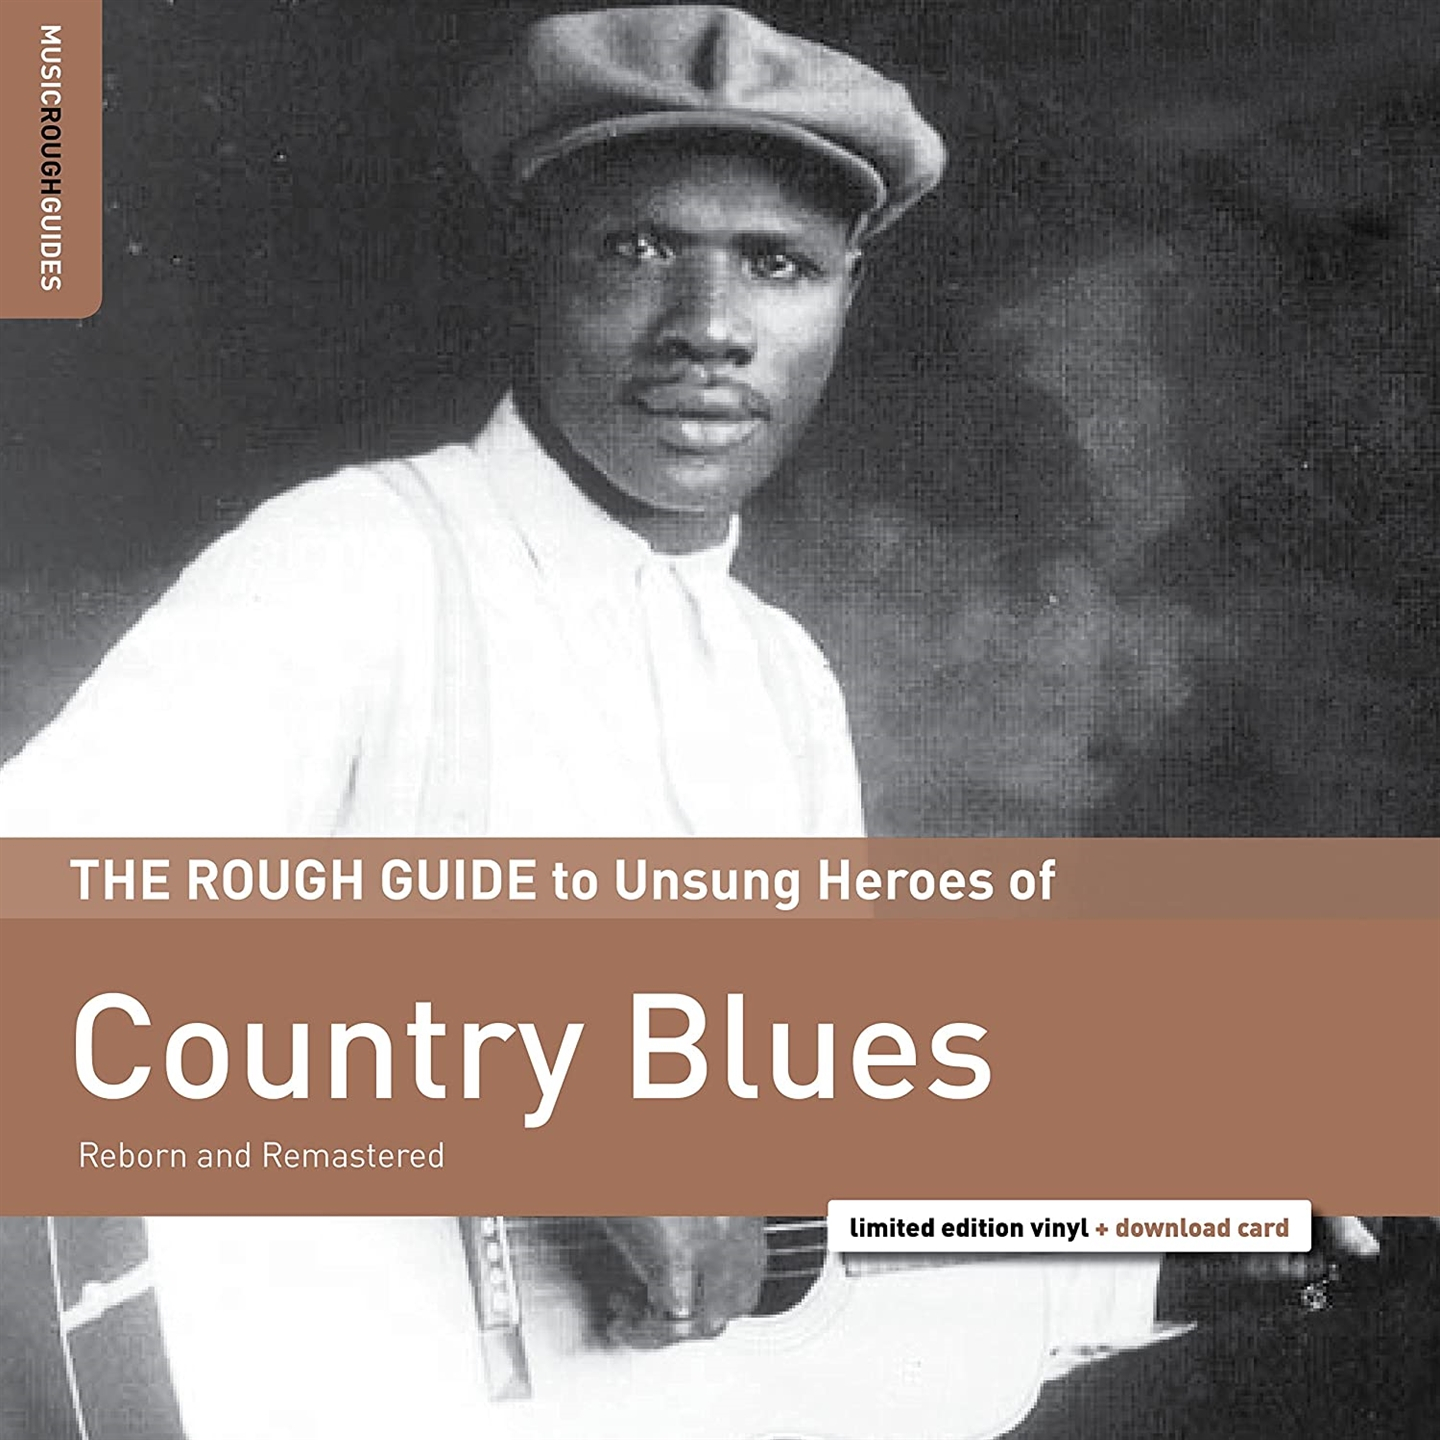 THE ROUGH GUIDE TO UNSUNG HEROES OF COUNTRY BLUES [LP]